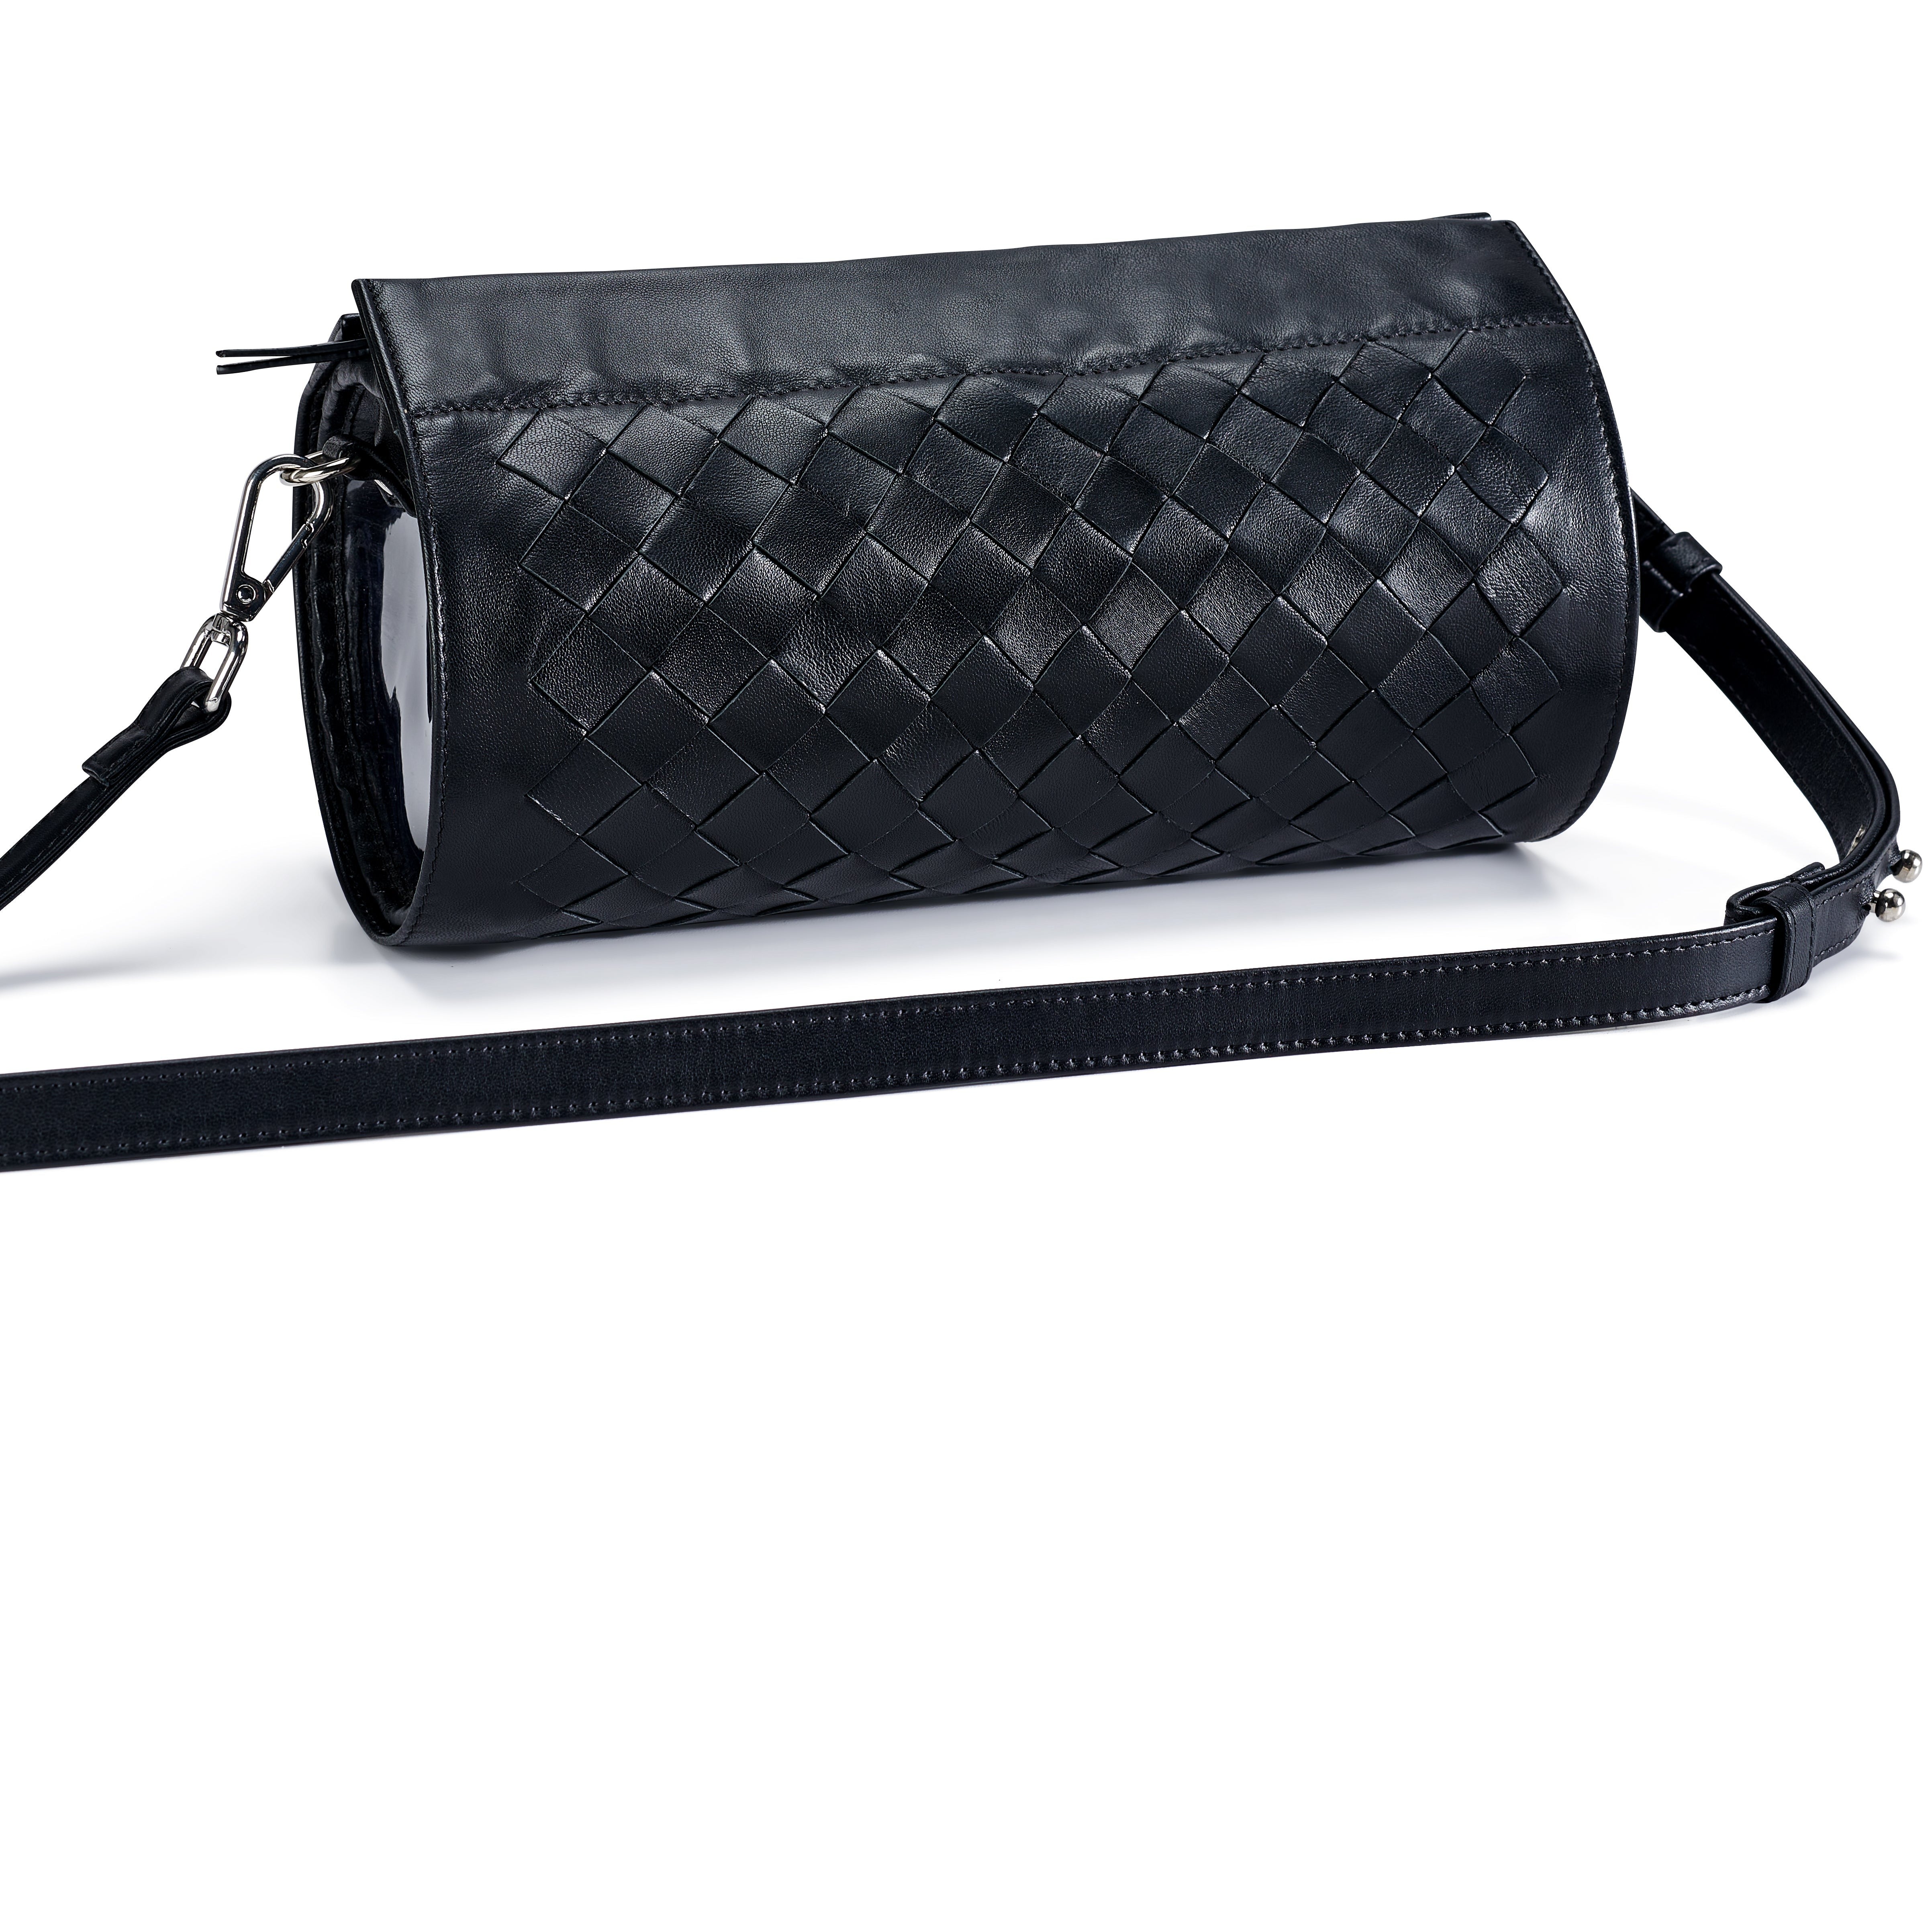 Black Woven Cover and Classic Clear Bag Combination